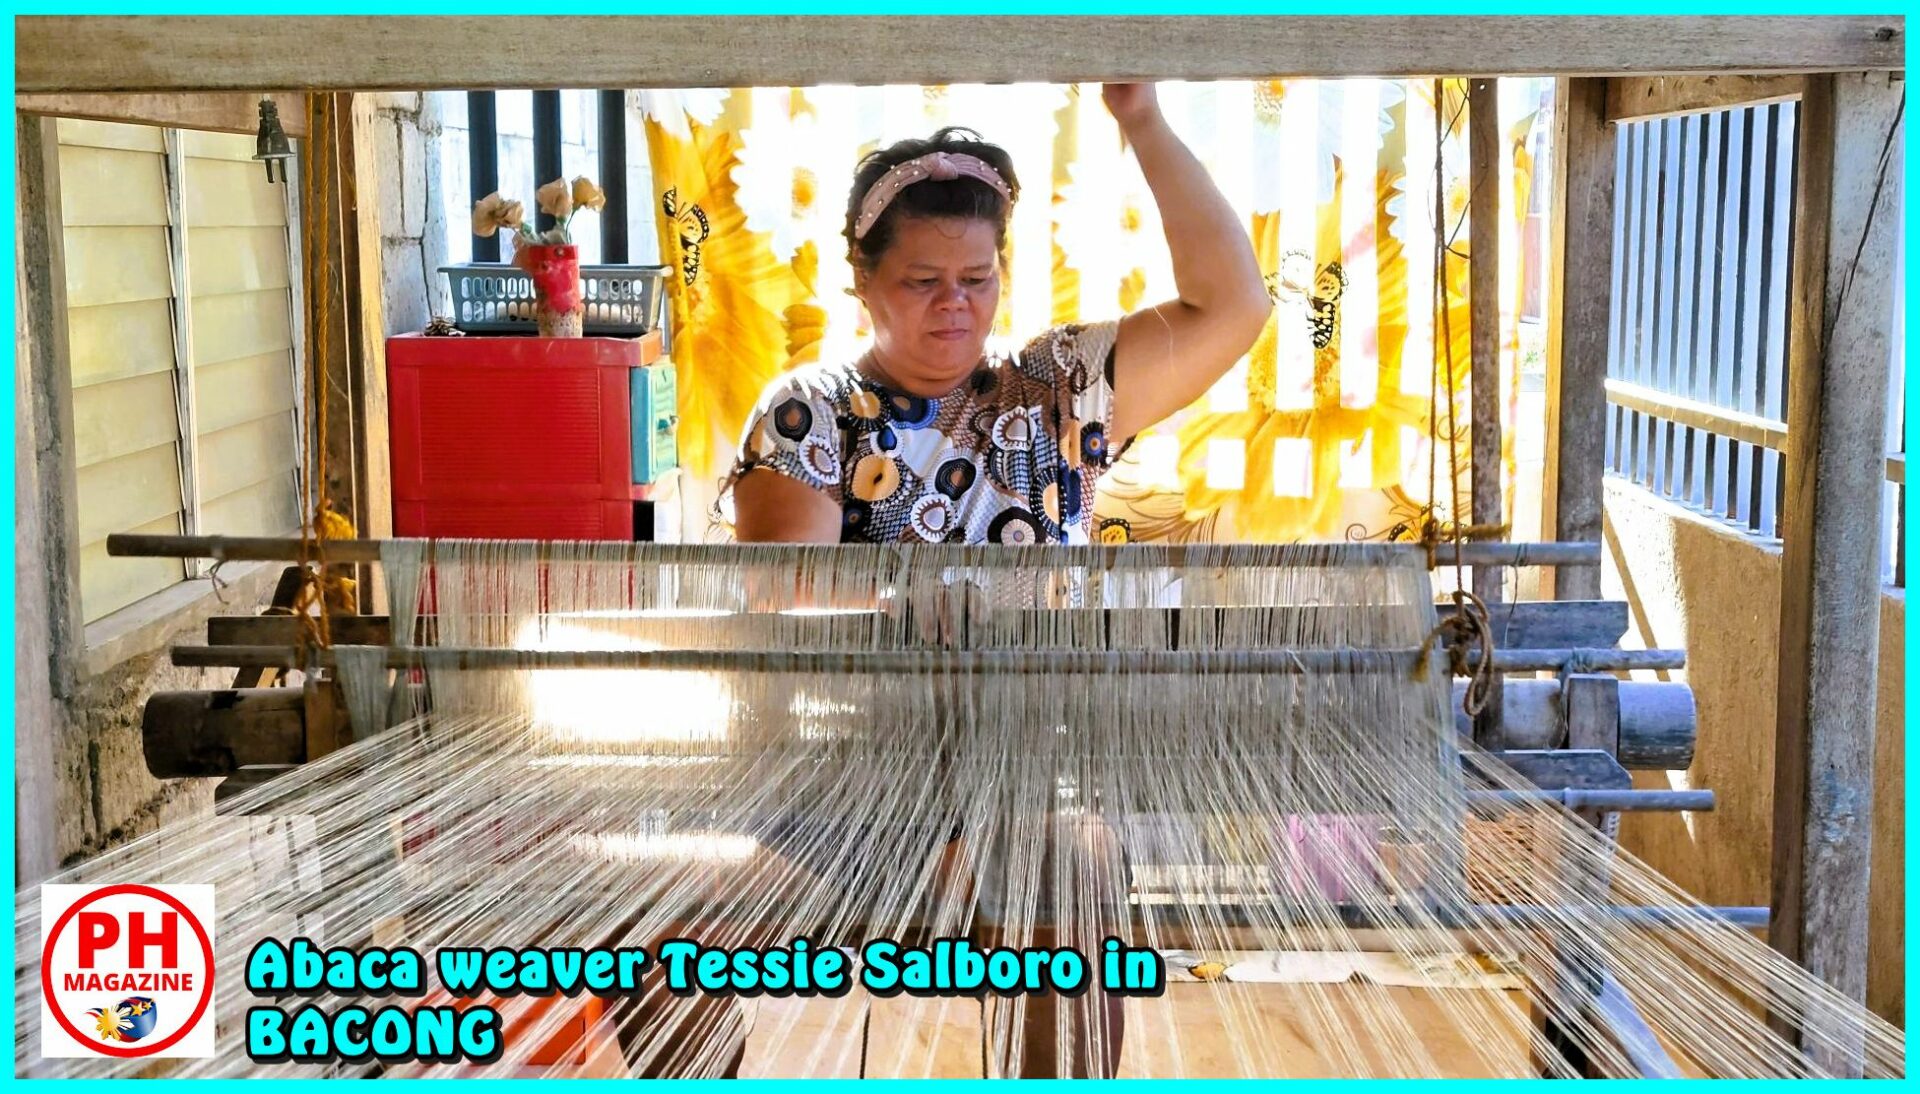 SIGHTS OF NEGROS - PHOTO OF THE DAY - Abaca weaver Tessie Salboro in Bacong